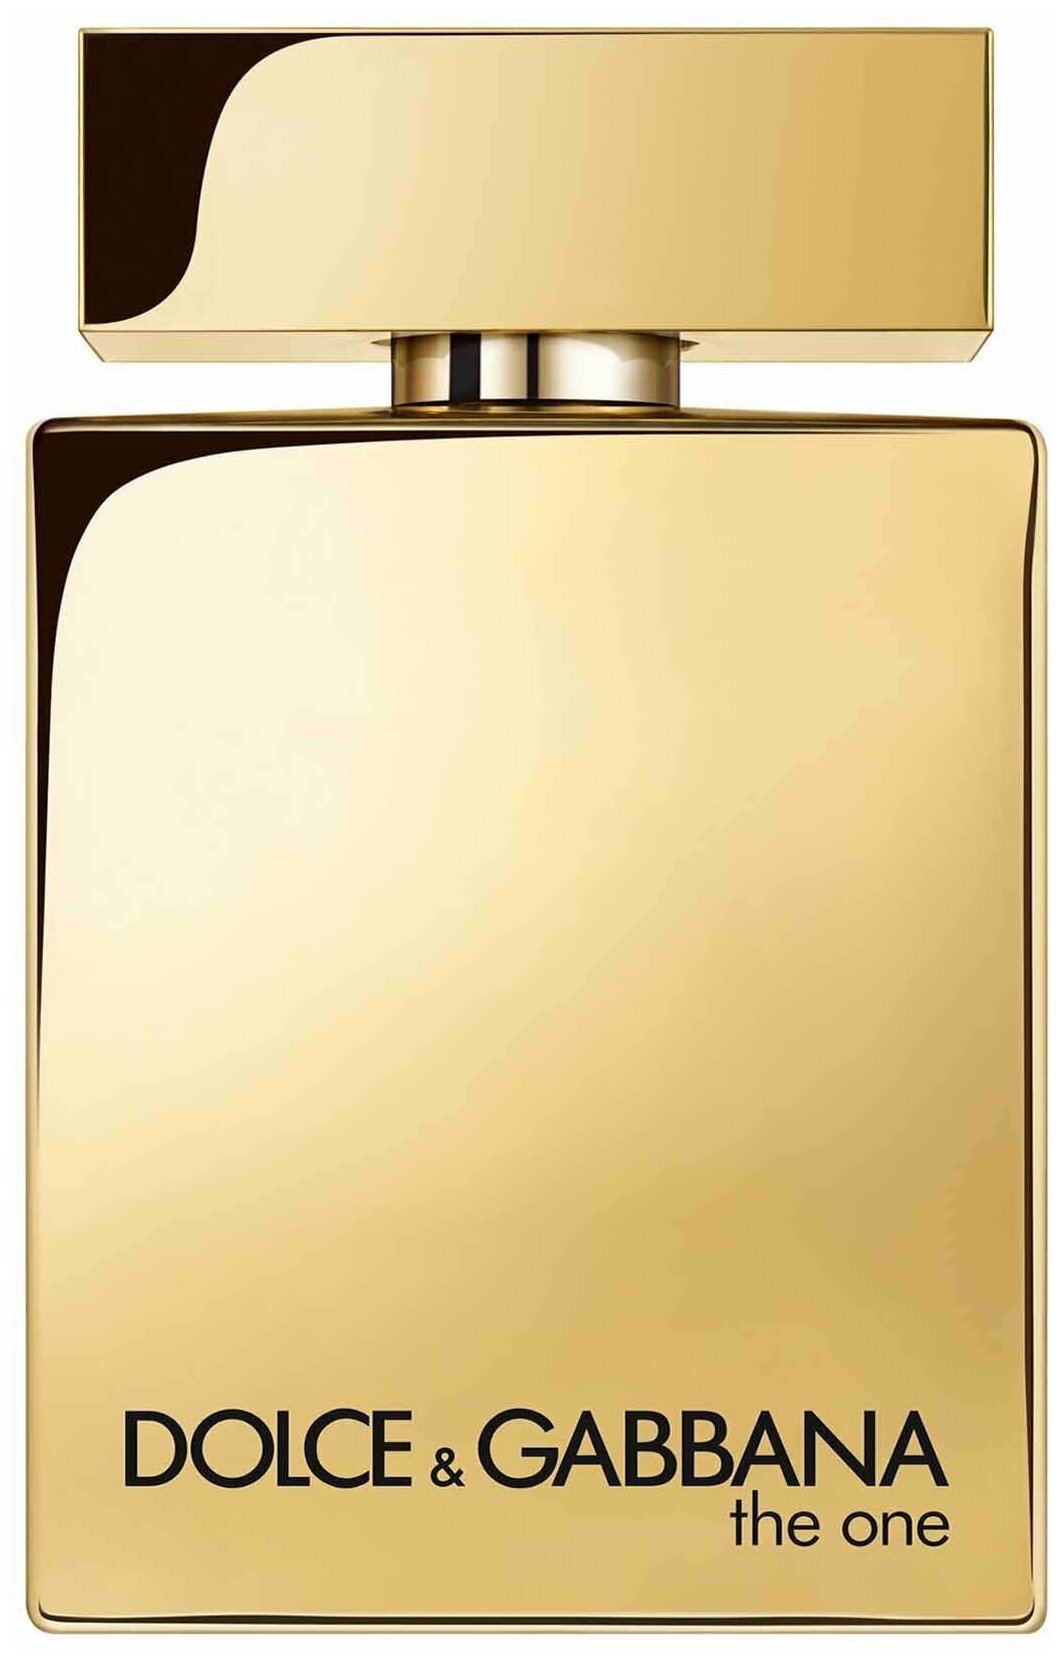 DOLCE & GABBANA парфюмерная вода The One for Men Gold, 50 мл